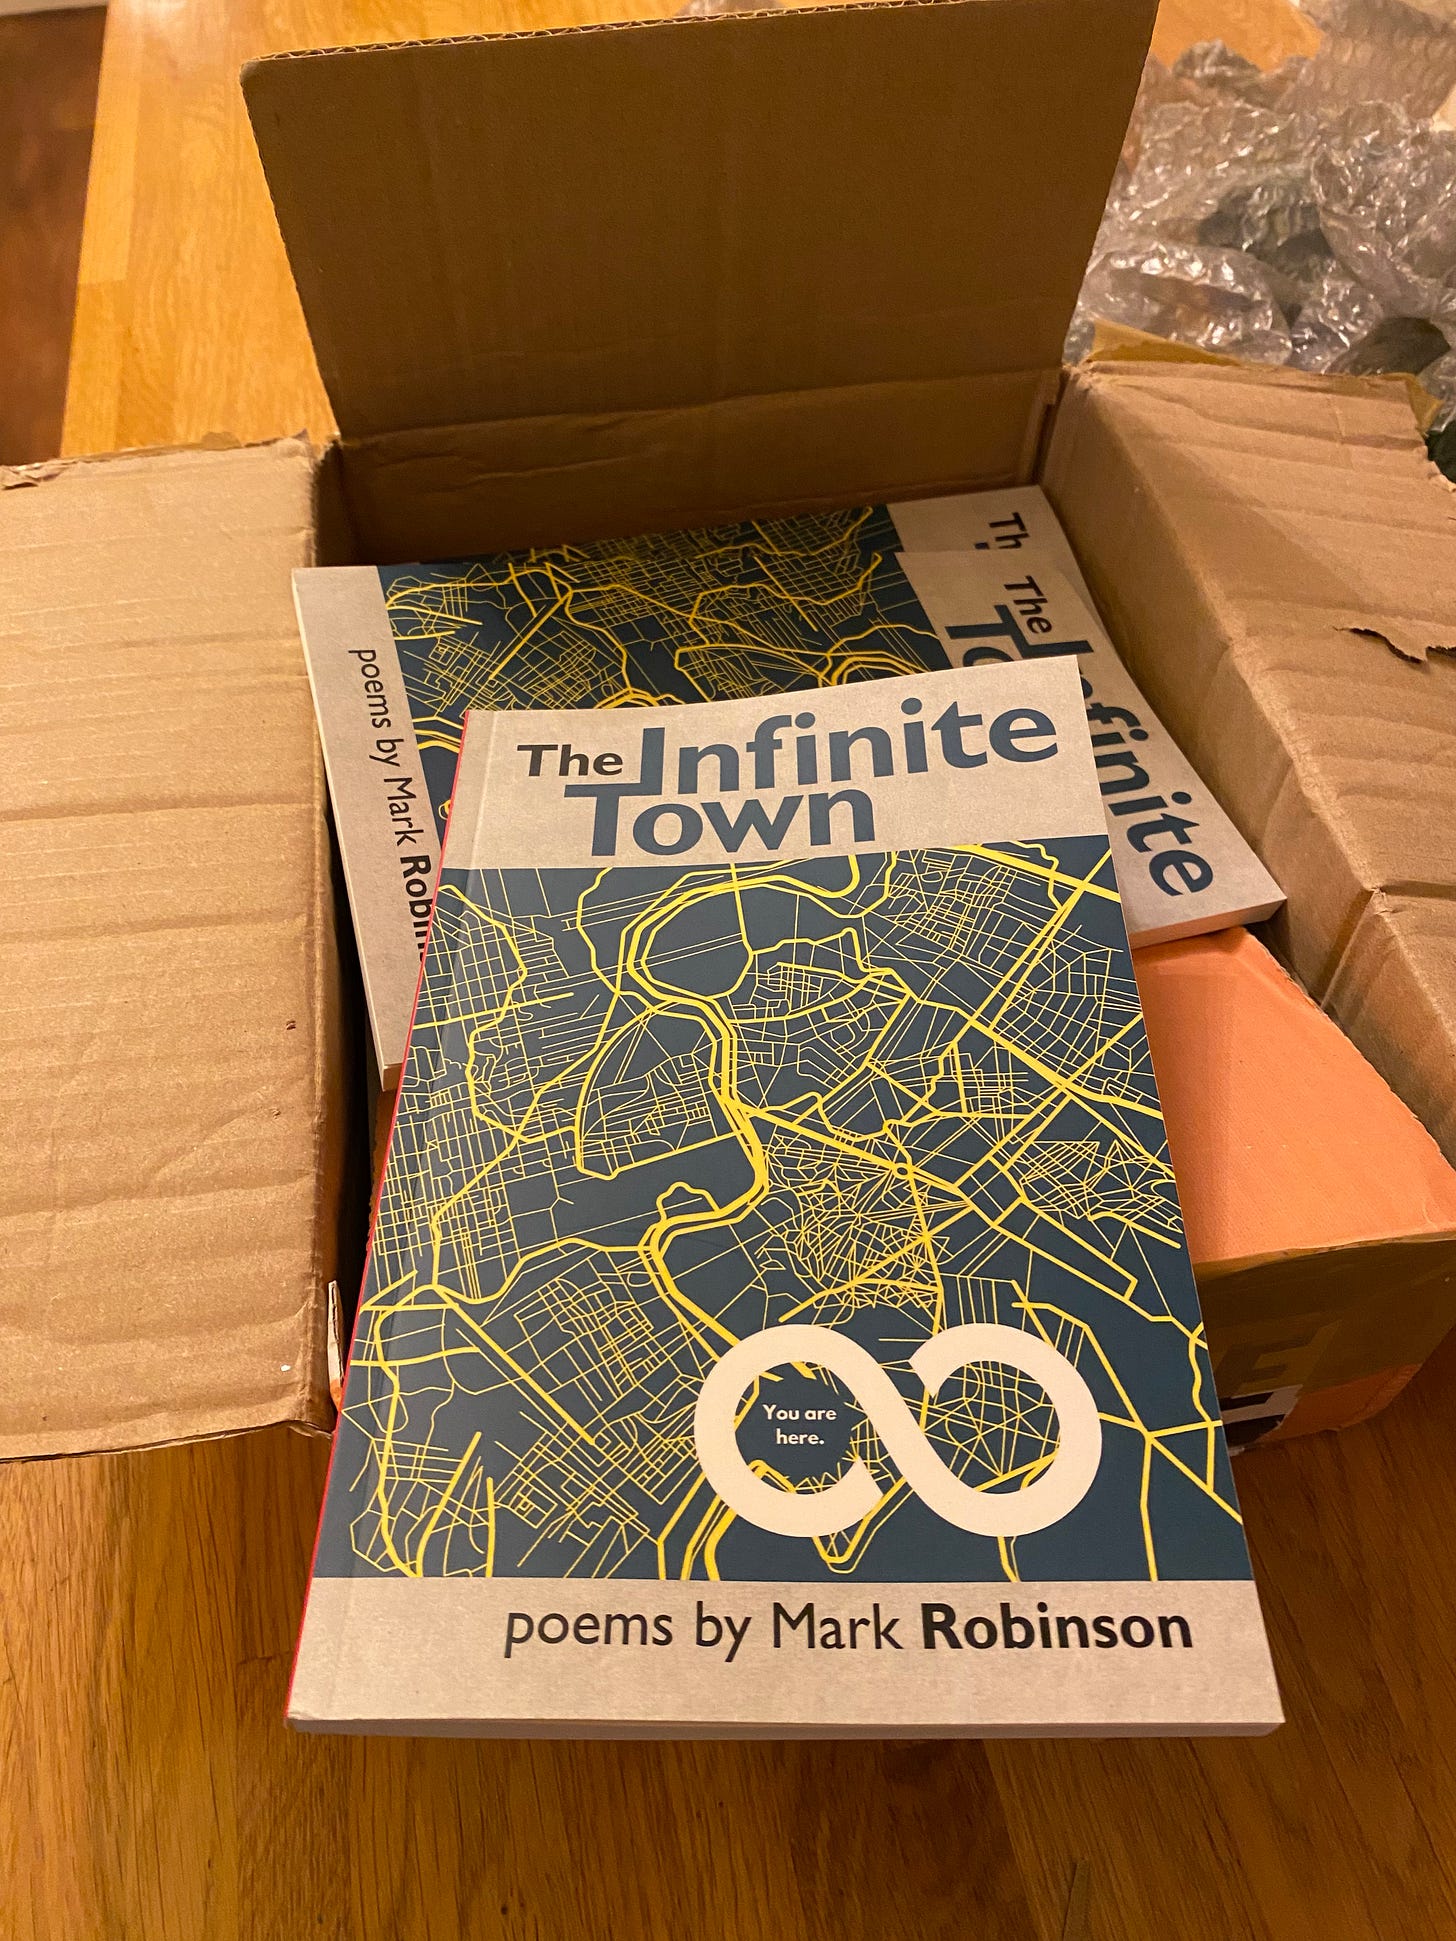 Paperback copies of The Infinite Town poems by Mark Robinson in a just opened package. Green and yellow map with infinity sign - in one half of which it reads: You are here.